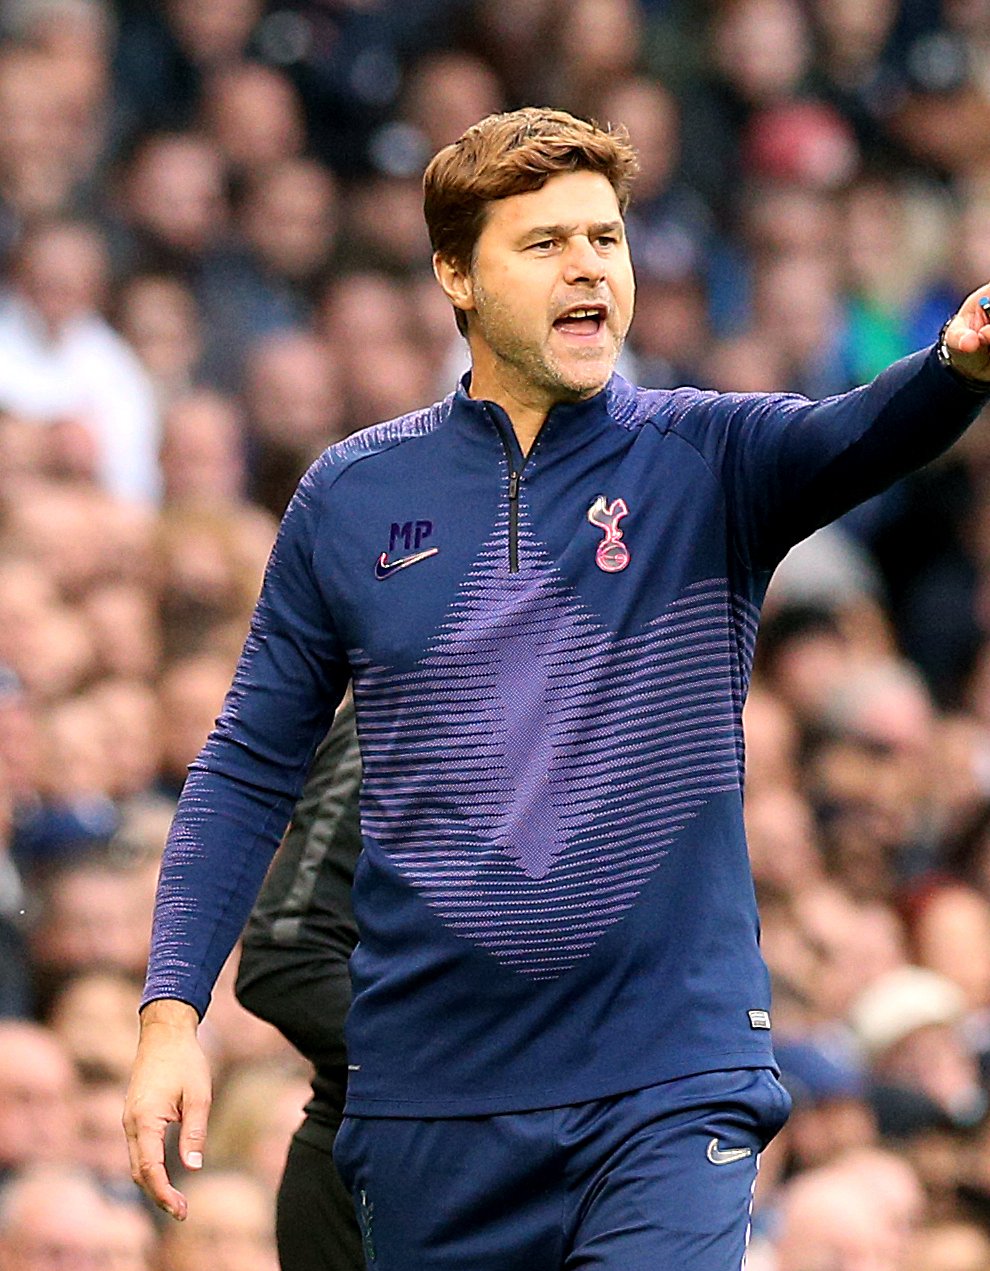 Mauricio Pochettino only featured for 25 minutes of the All or Nothing documentary